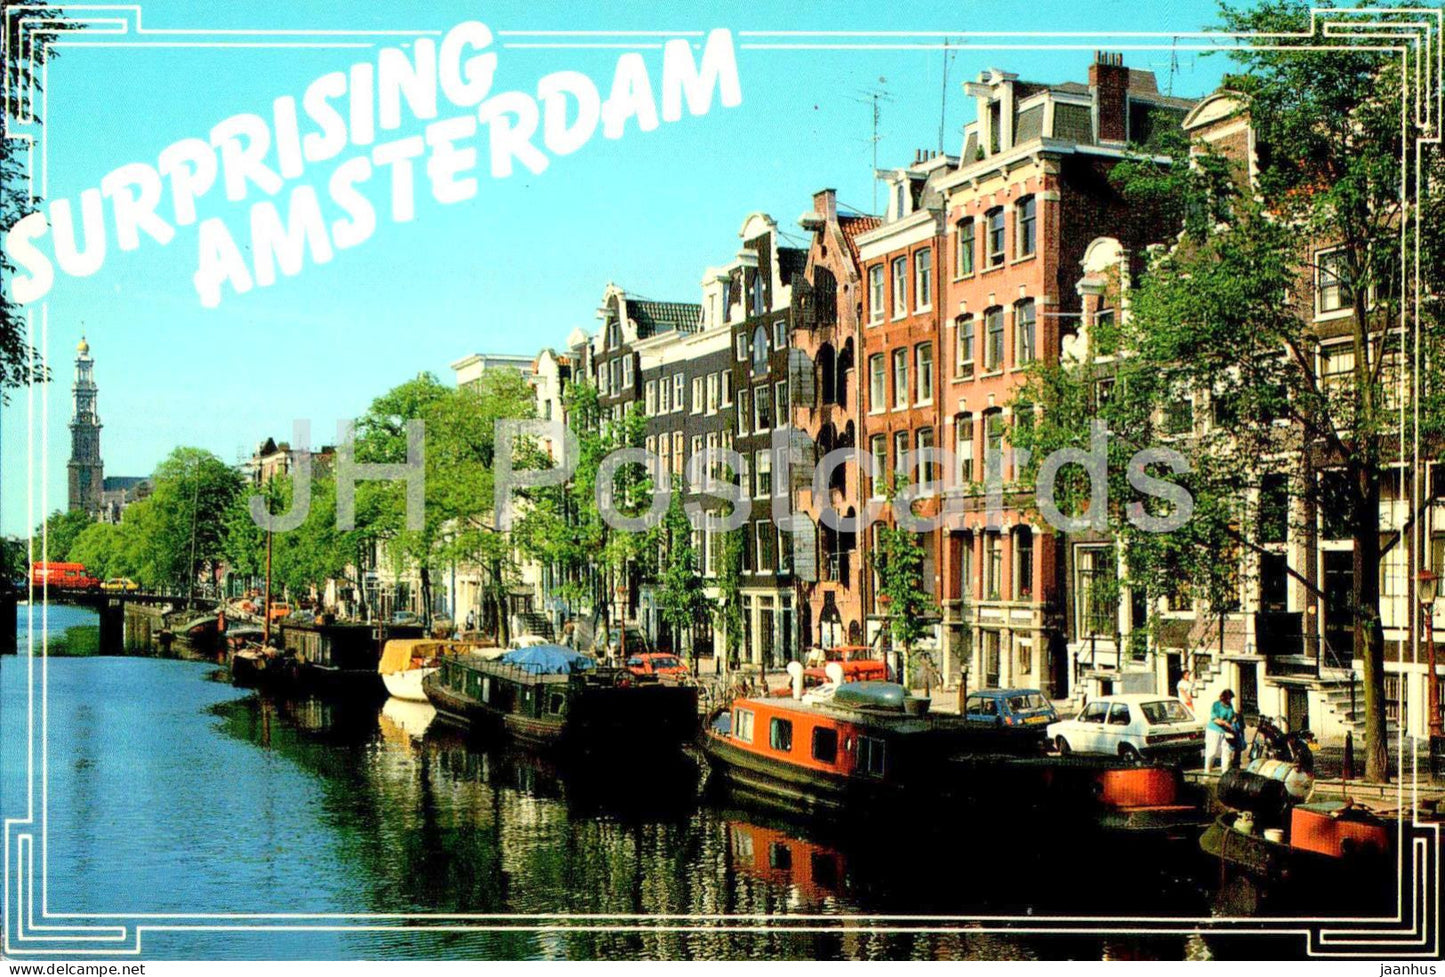 Surprising Amsterdam - Prinsengracht with the West Church in the background - boat - 1986 - Netherlands - used - JH Postcards